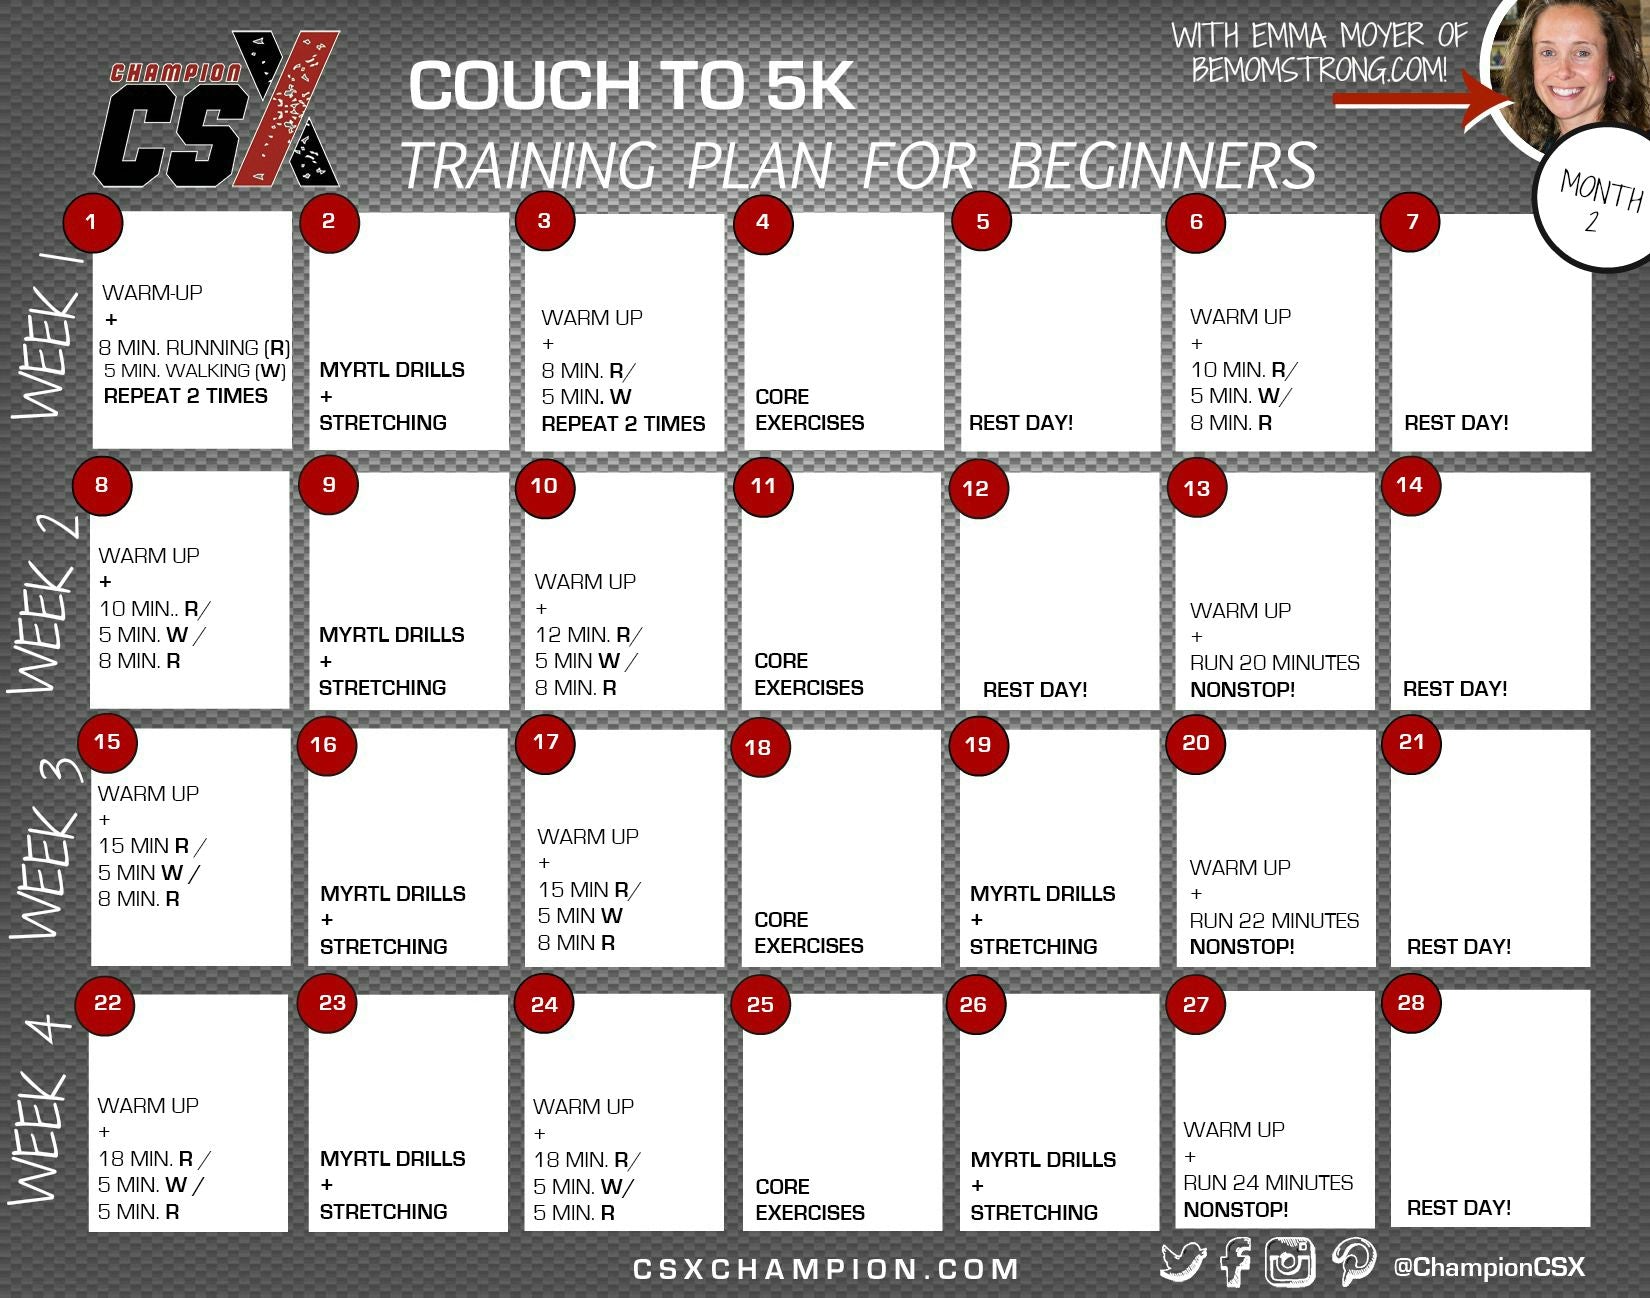 Couch to 5K Training Plan - Month 2 - Calendar Image